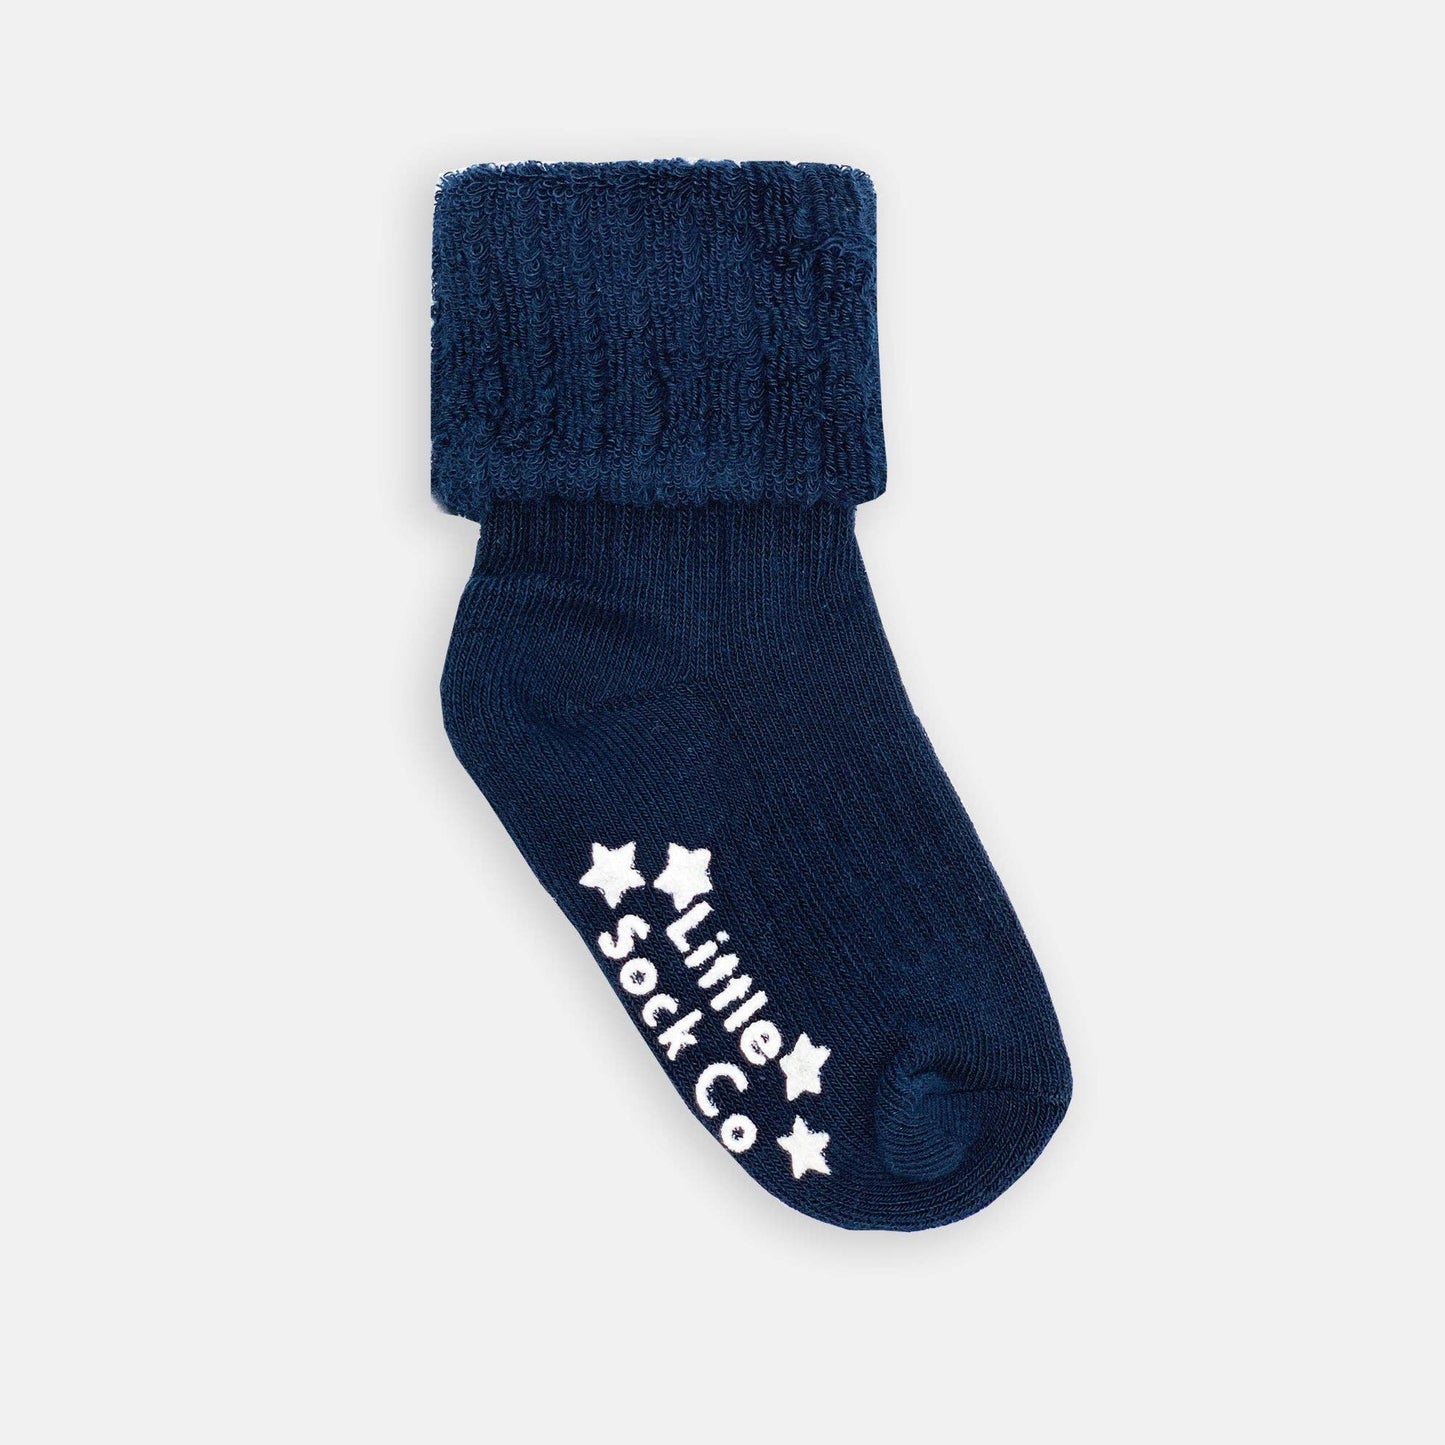 Cosy Stay-On Non-Slip Baby Socks in Navy: 1-2 years